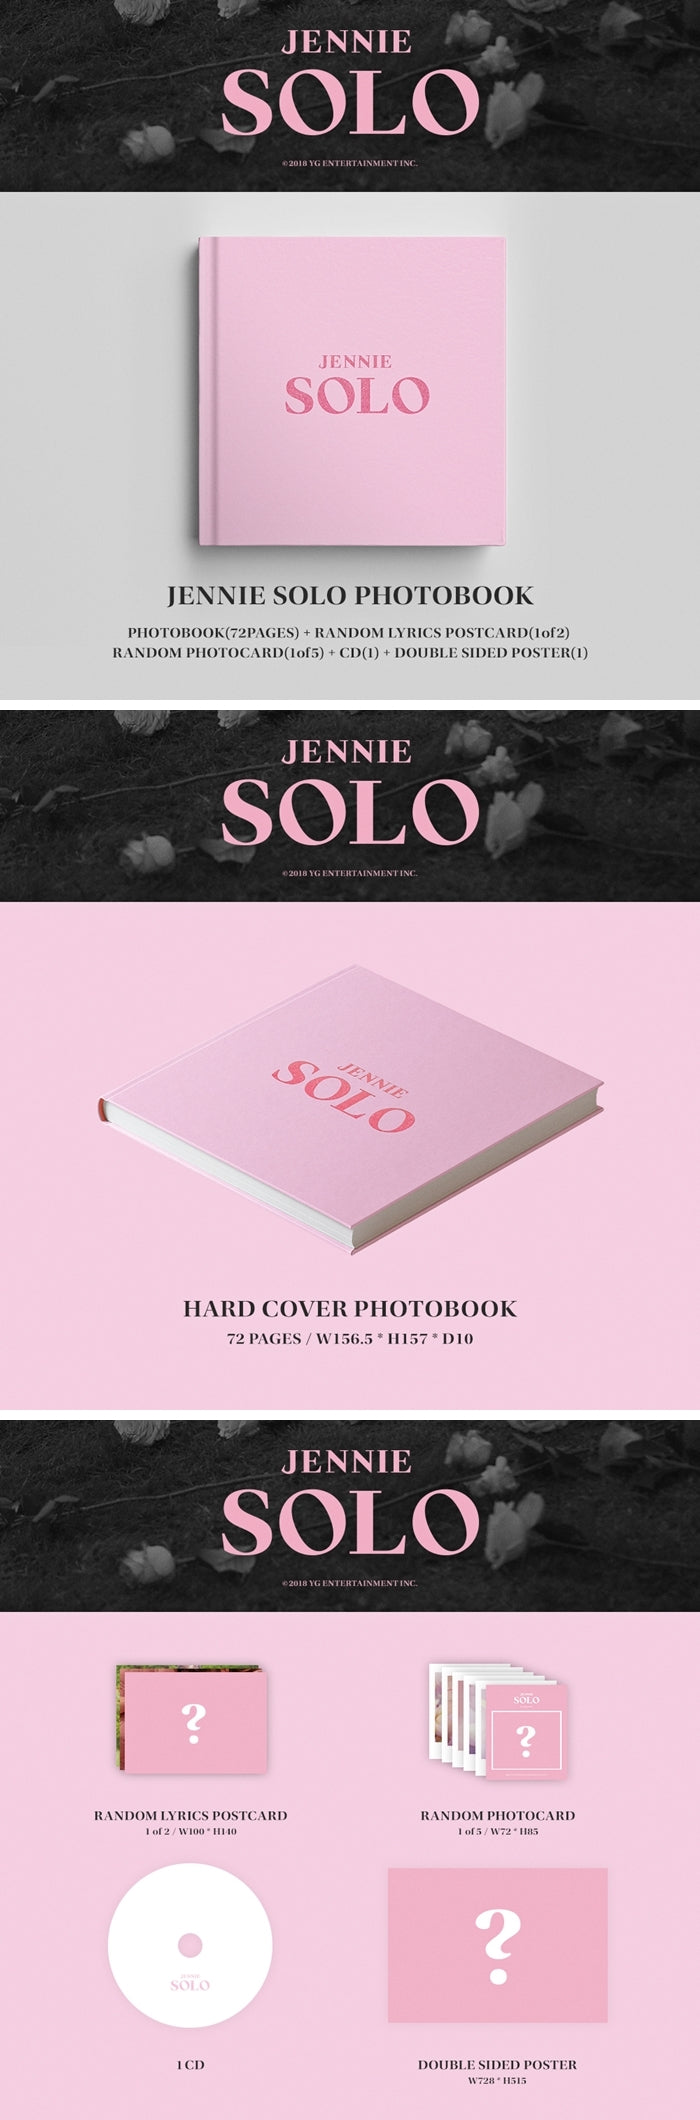 JENNIE [SOLO] PHOTOBOOK @JENNIE ABOUT 'SOLO', presented by Jenny, a member of YG's representative girl group BLACKPINK, cr...